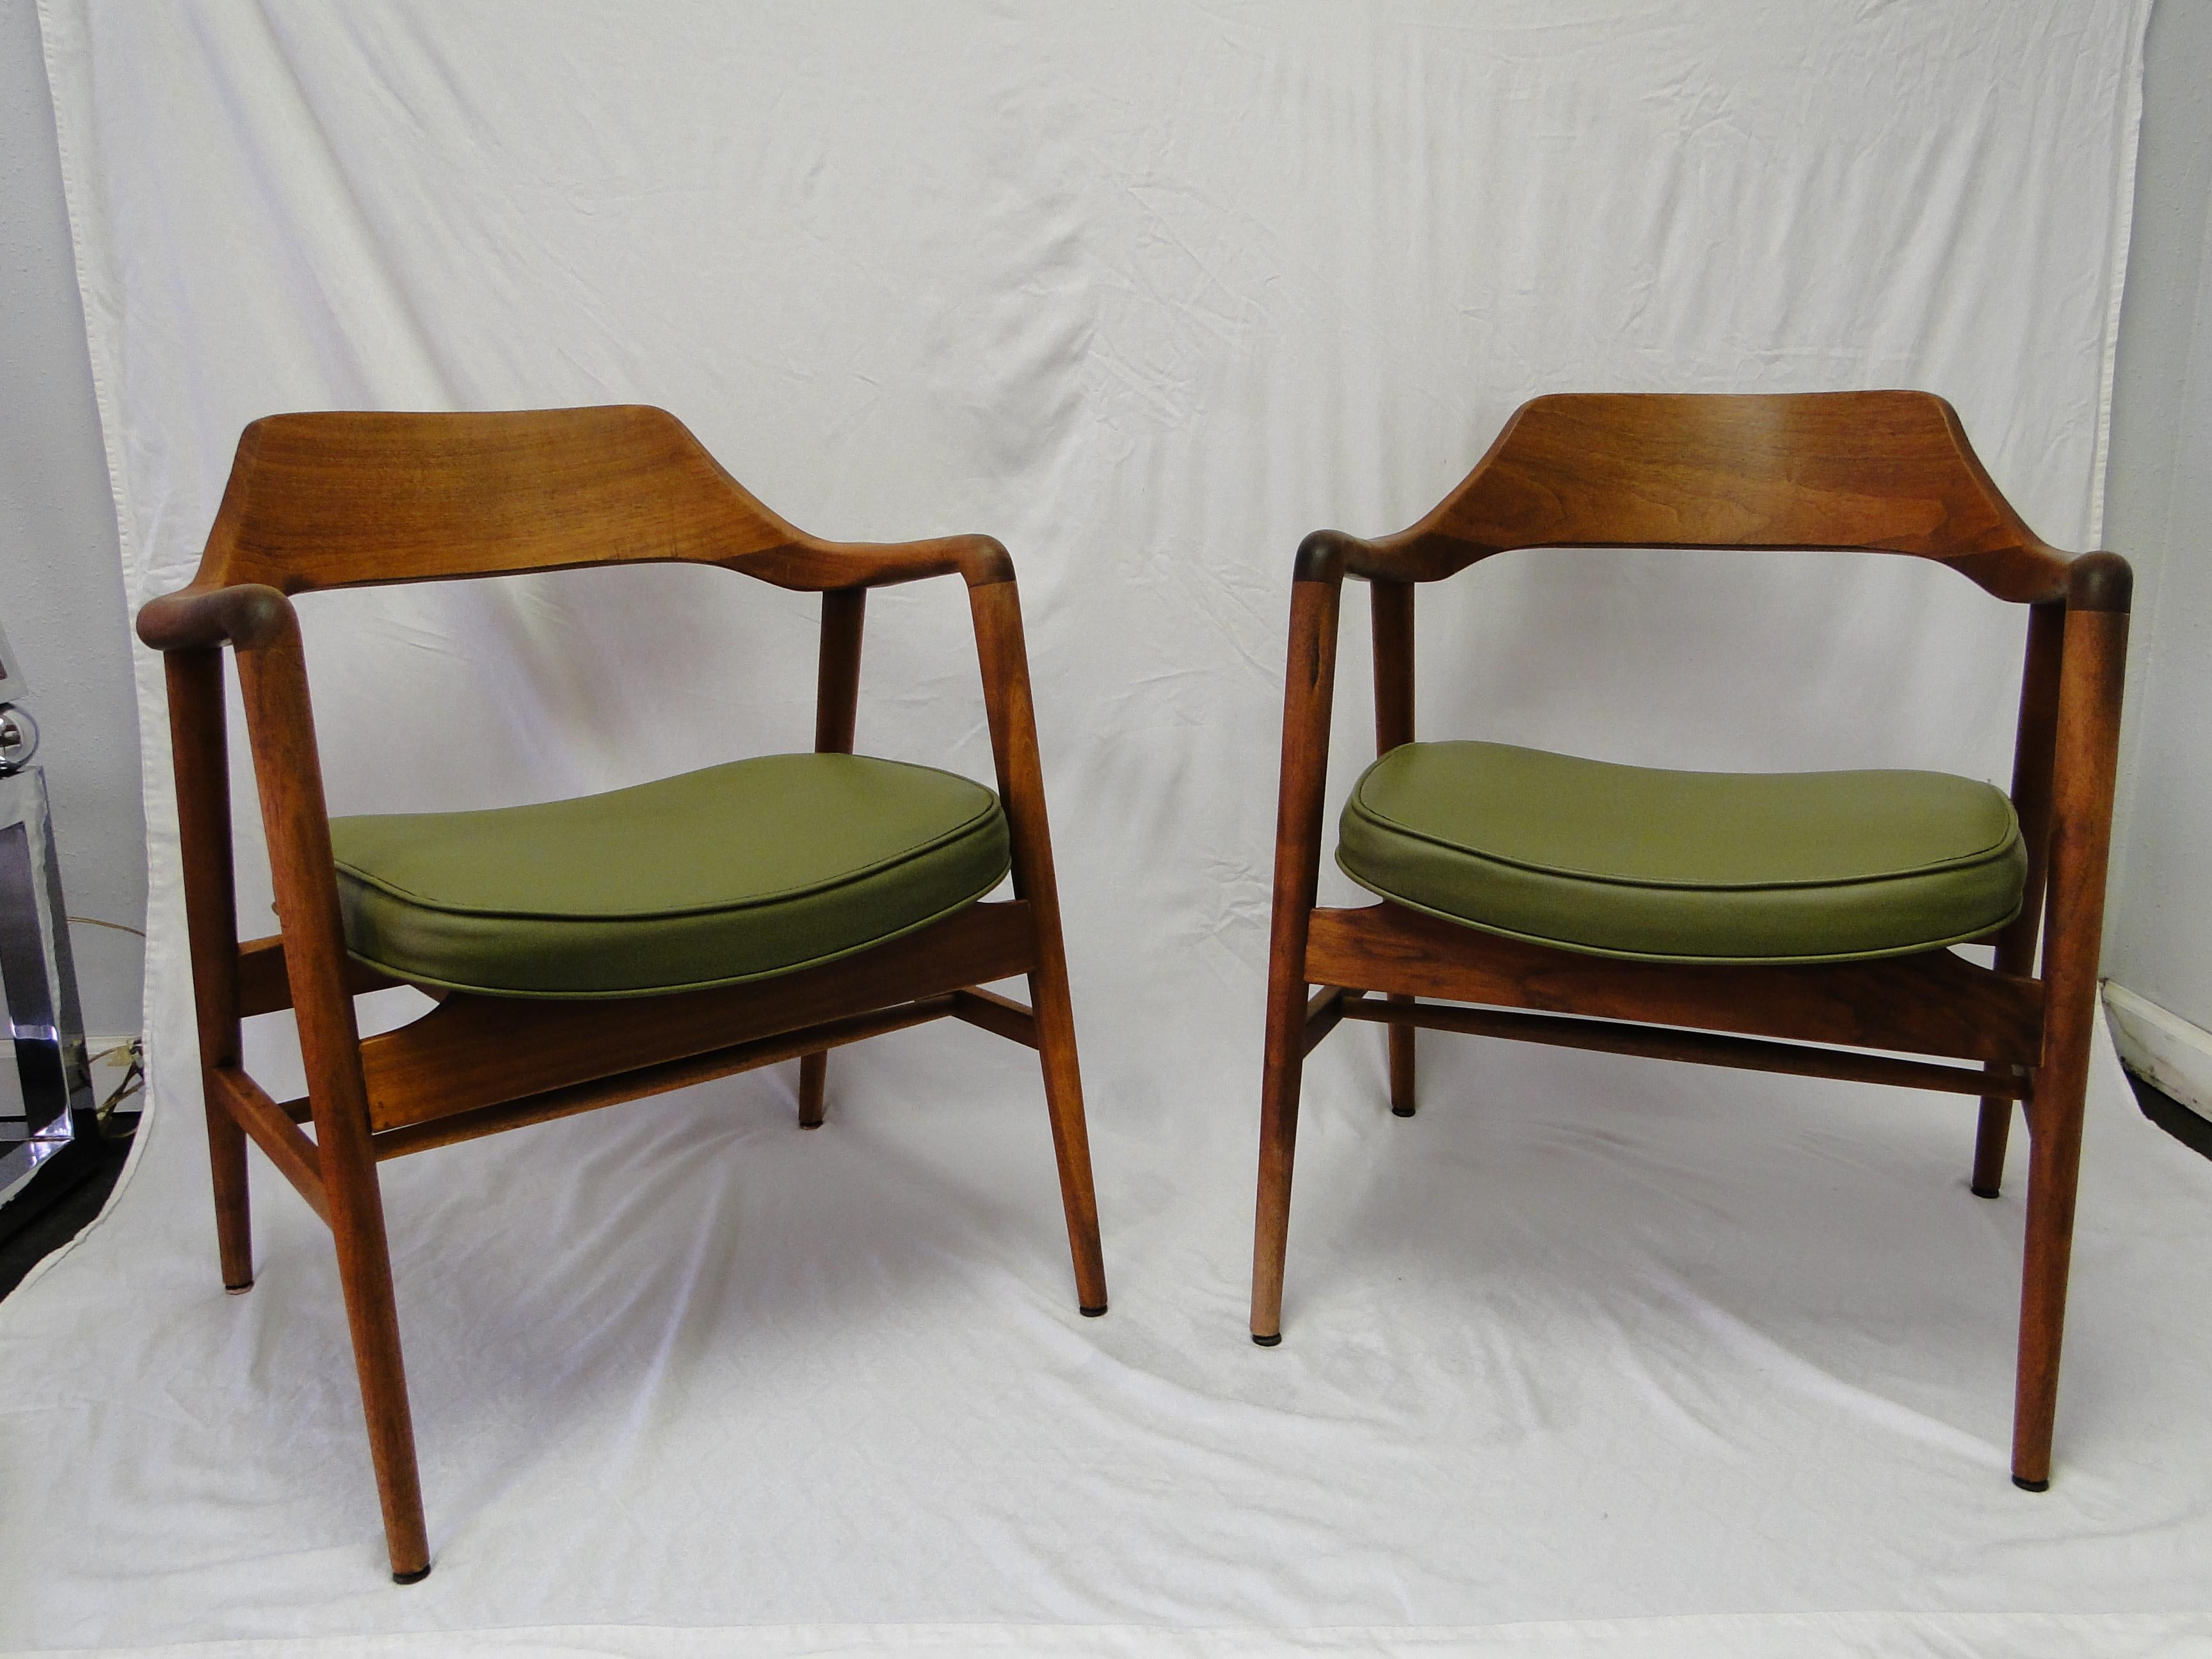 Beautiful sculptural vintage midcentury walnut chair by Gunlocke. Overall the chair is in great condition for the age but the chairs are put together through pegs and over time have loosened so there is a bit of wiggle in the chairs. These would